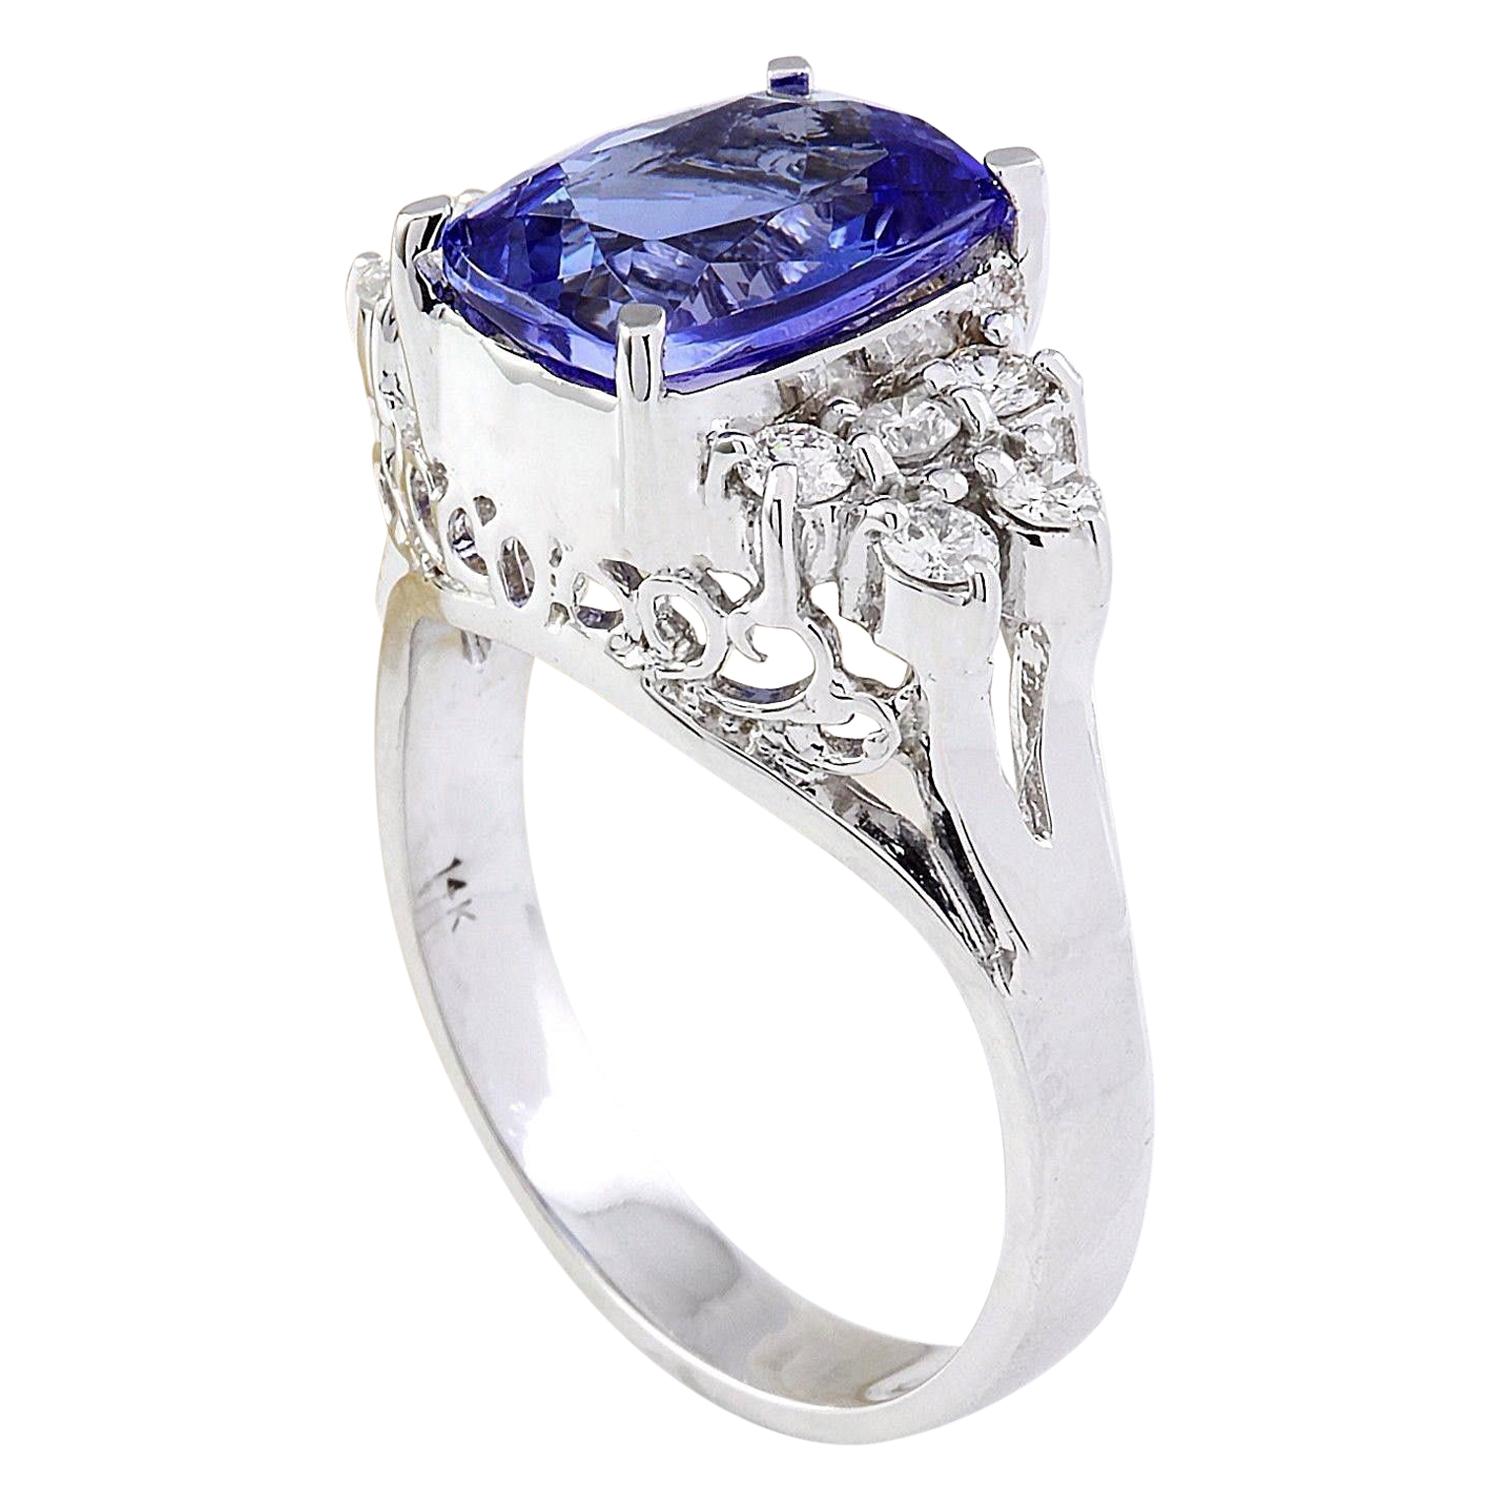 Cushion Cut Exquisite Natural Tanzanite Diamond Ring In 14K Solid White Gold  For Sale